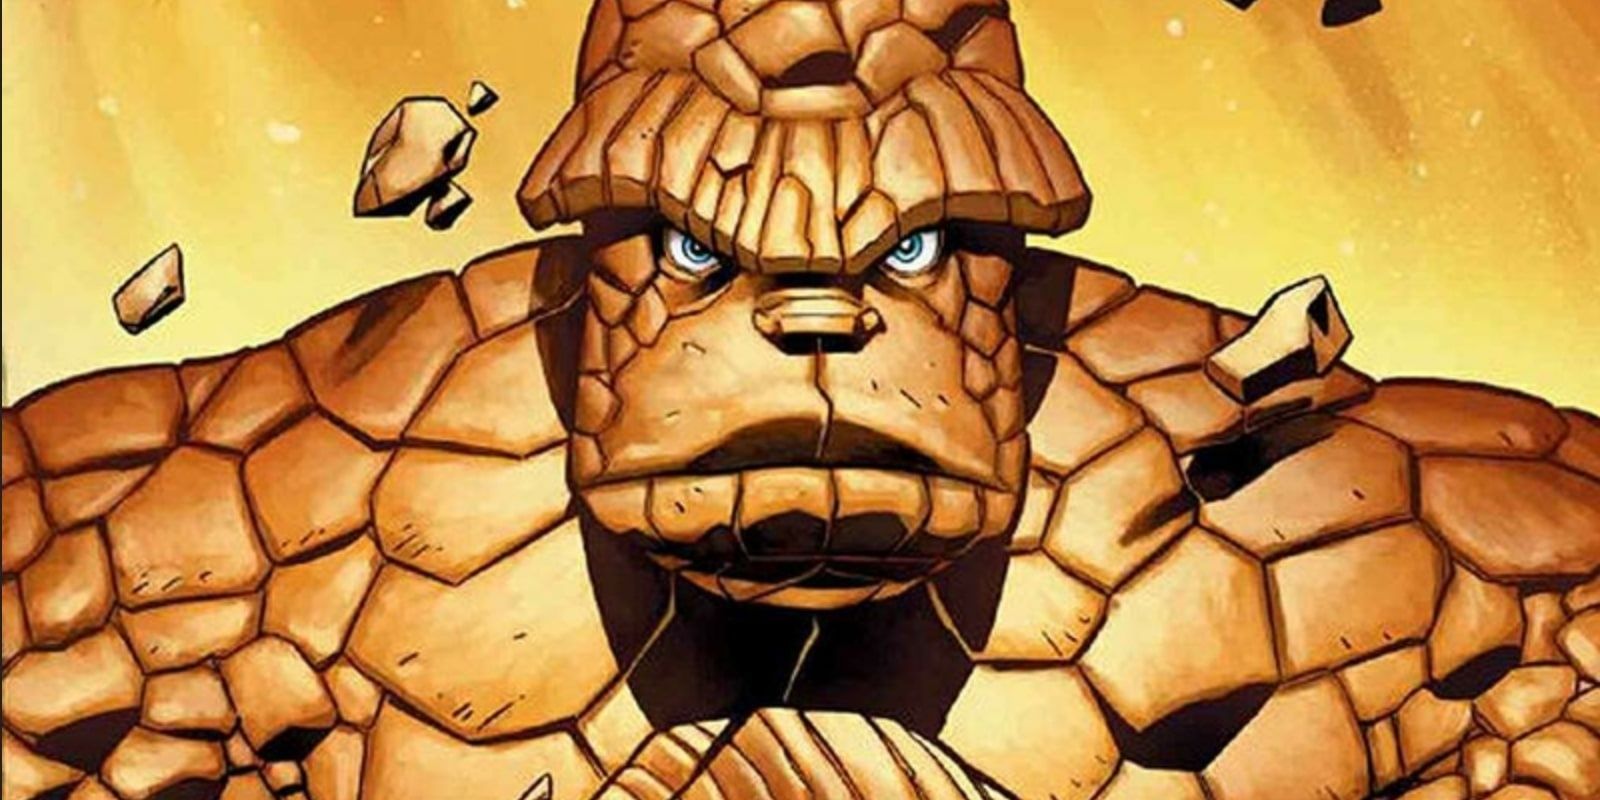 The Thing from the Fantastic Four